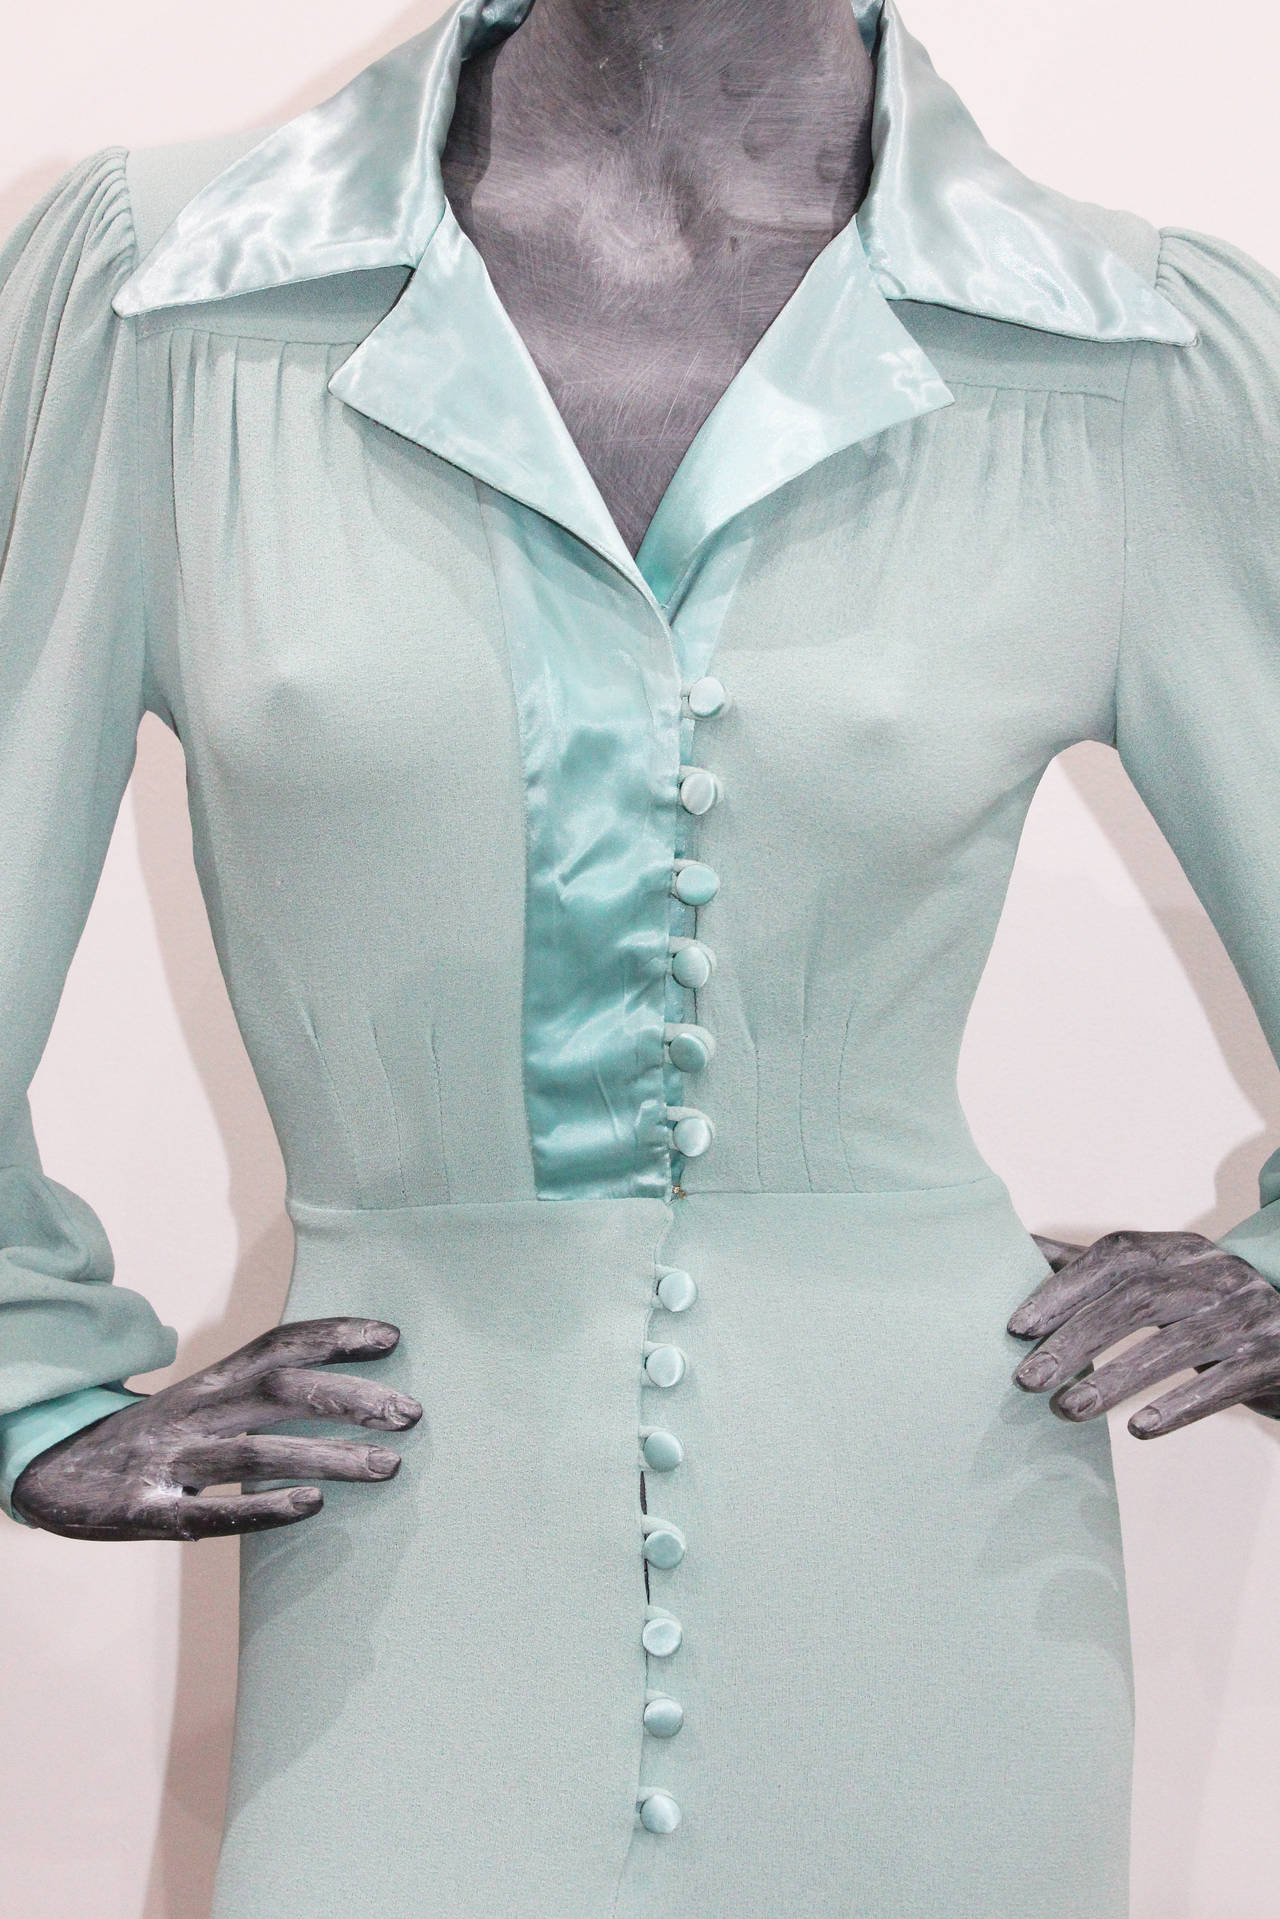 A fabulous dress by the 'King of Kings Road' Ossie Clark. The dress features a pointed satin collar, satin buttons running from the bust to the lower waist, satin cuffs and pleated billowing sleeves. The dress is in a duck egg blue moss crepe. This